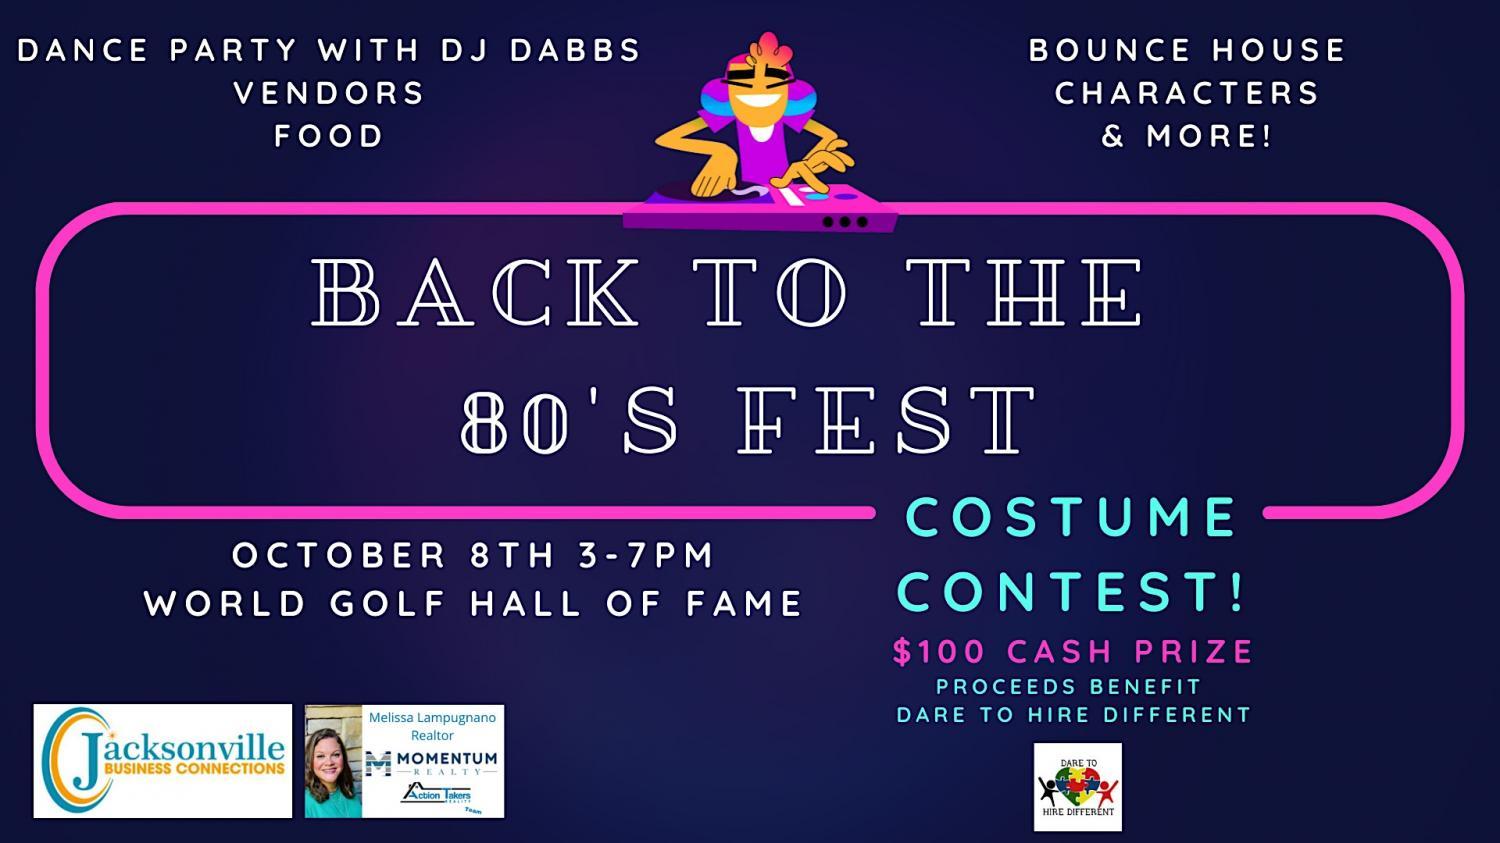 Back to the 80's Fest & Costume Contest
Sat Oct 22, 3:00 PM - Sat Oct 22, 7:00 PM
in 2 days